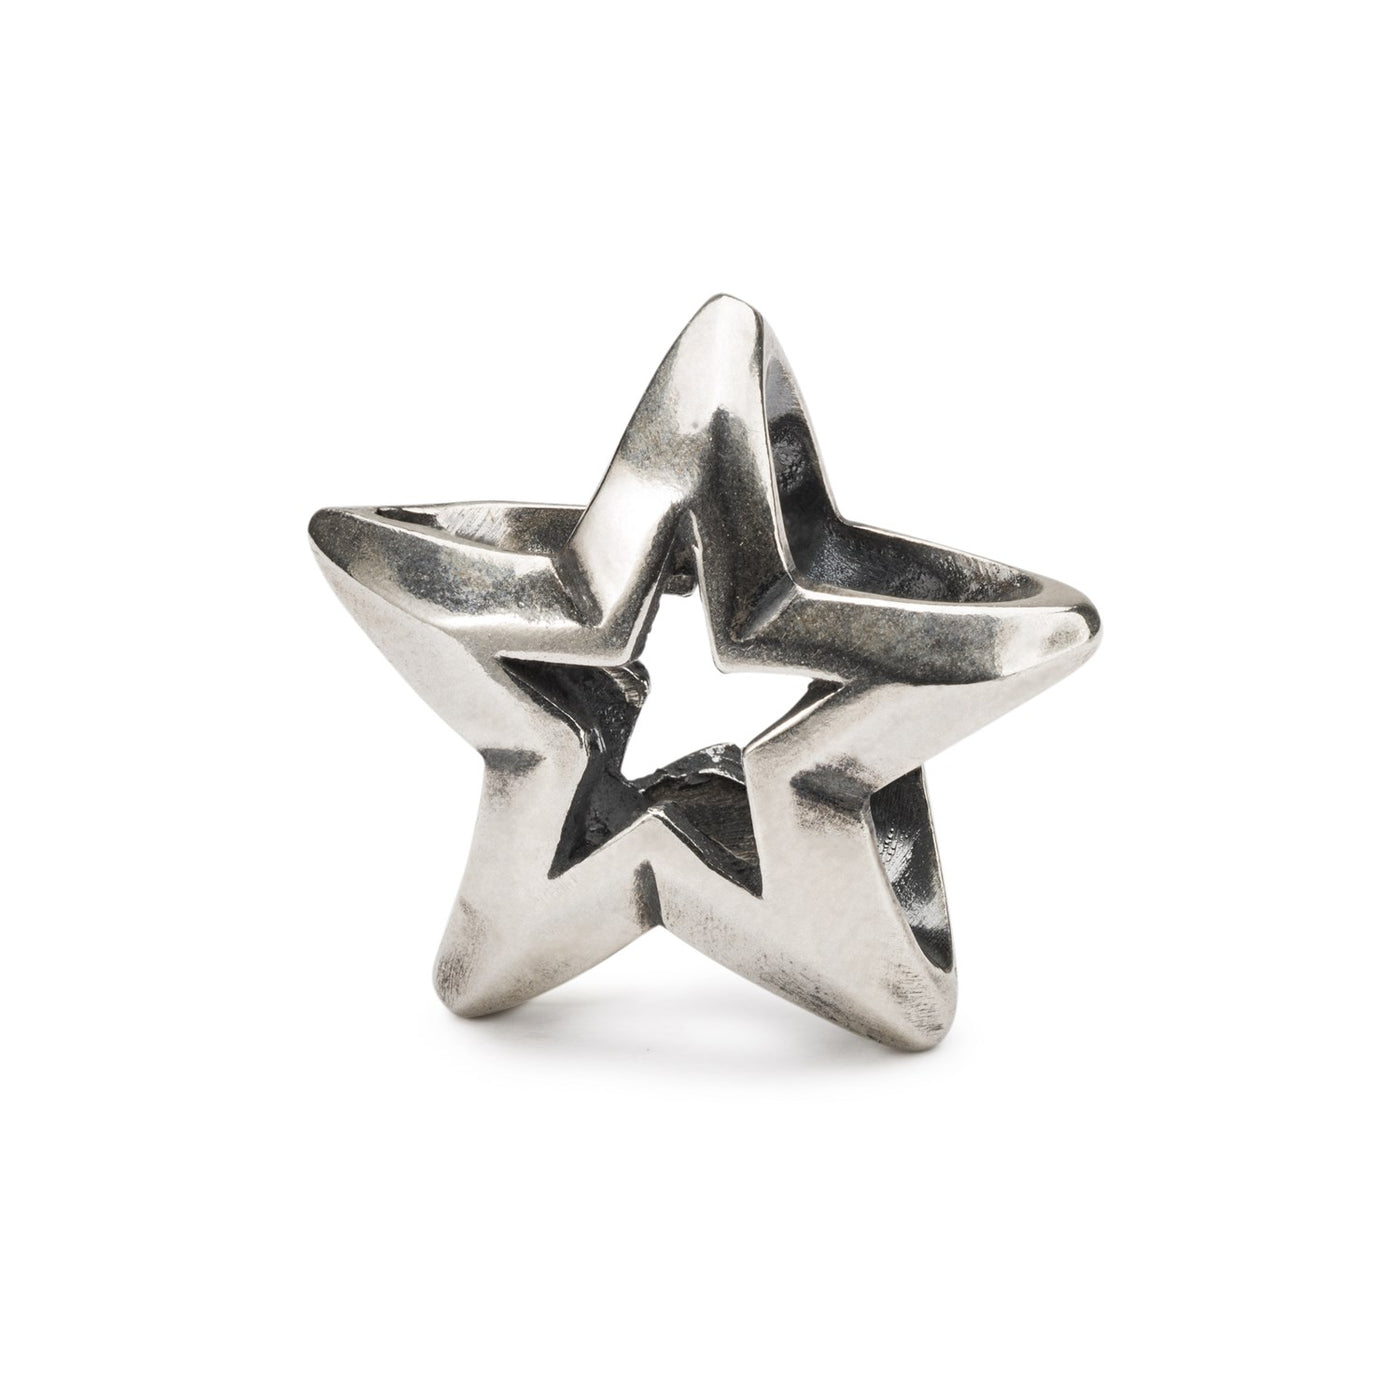 Lucky Star silver bead with a five-pointed star symbolizing good fortune and positive energy.